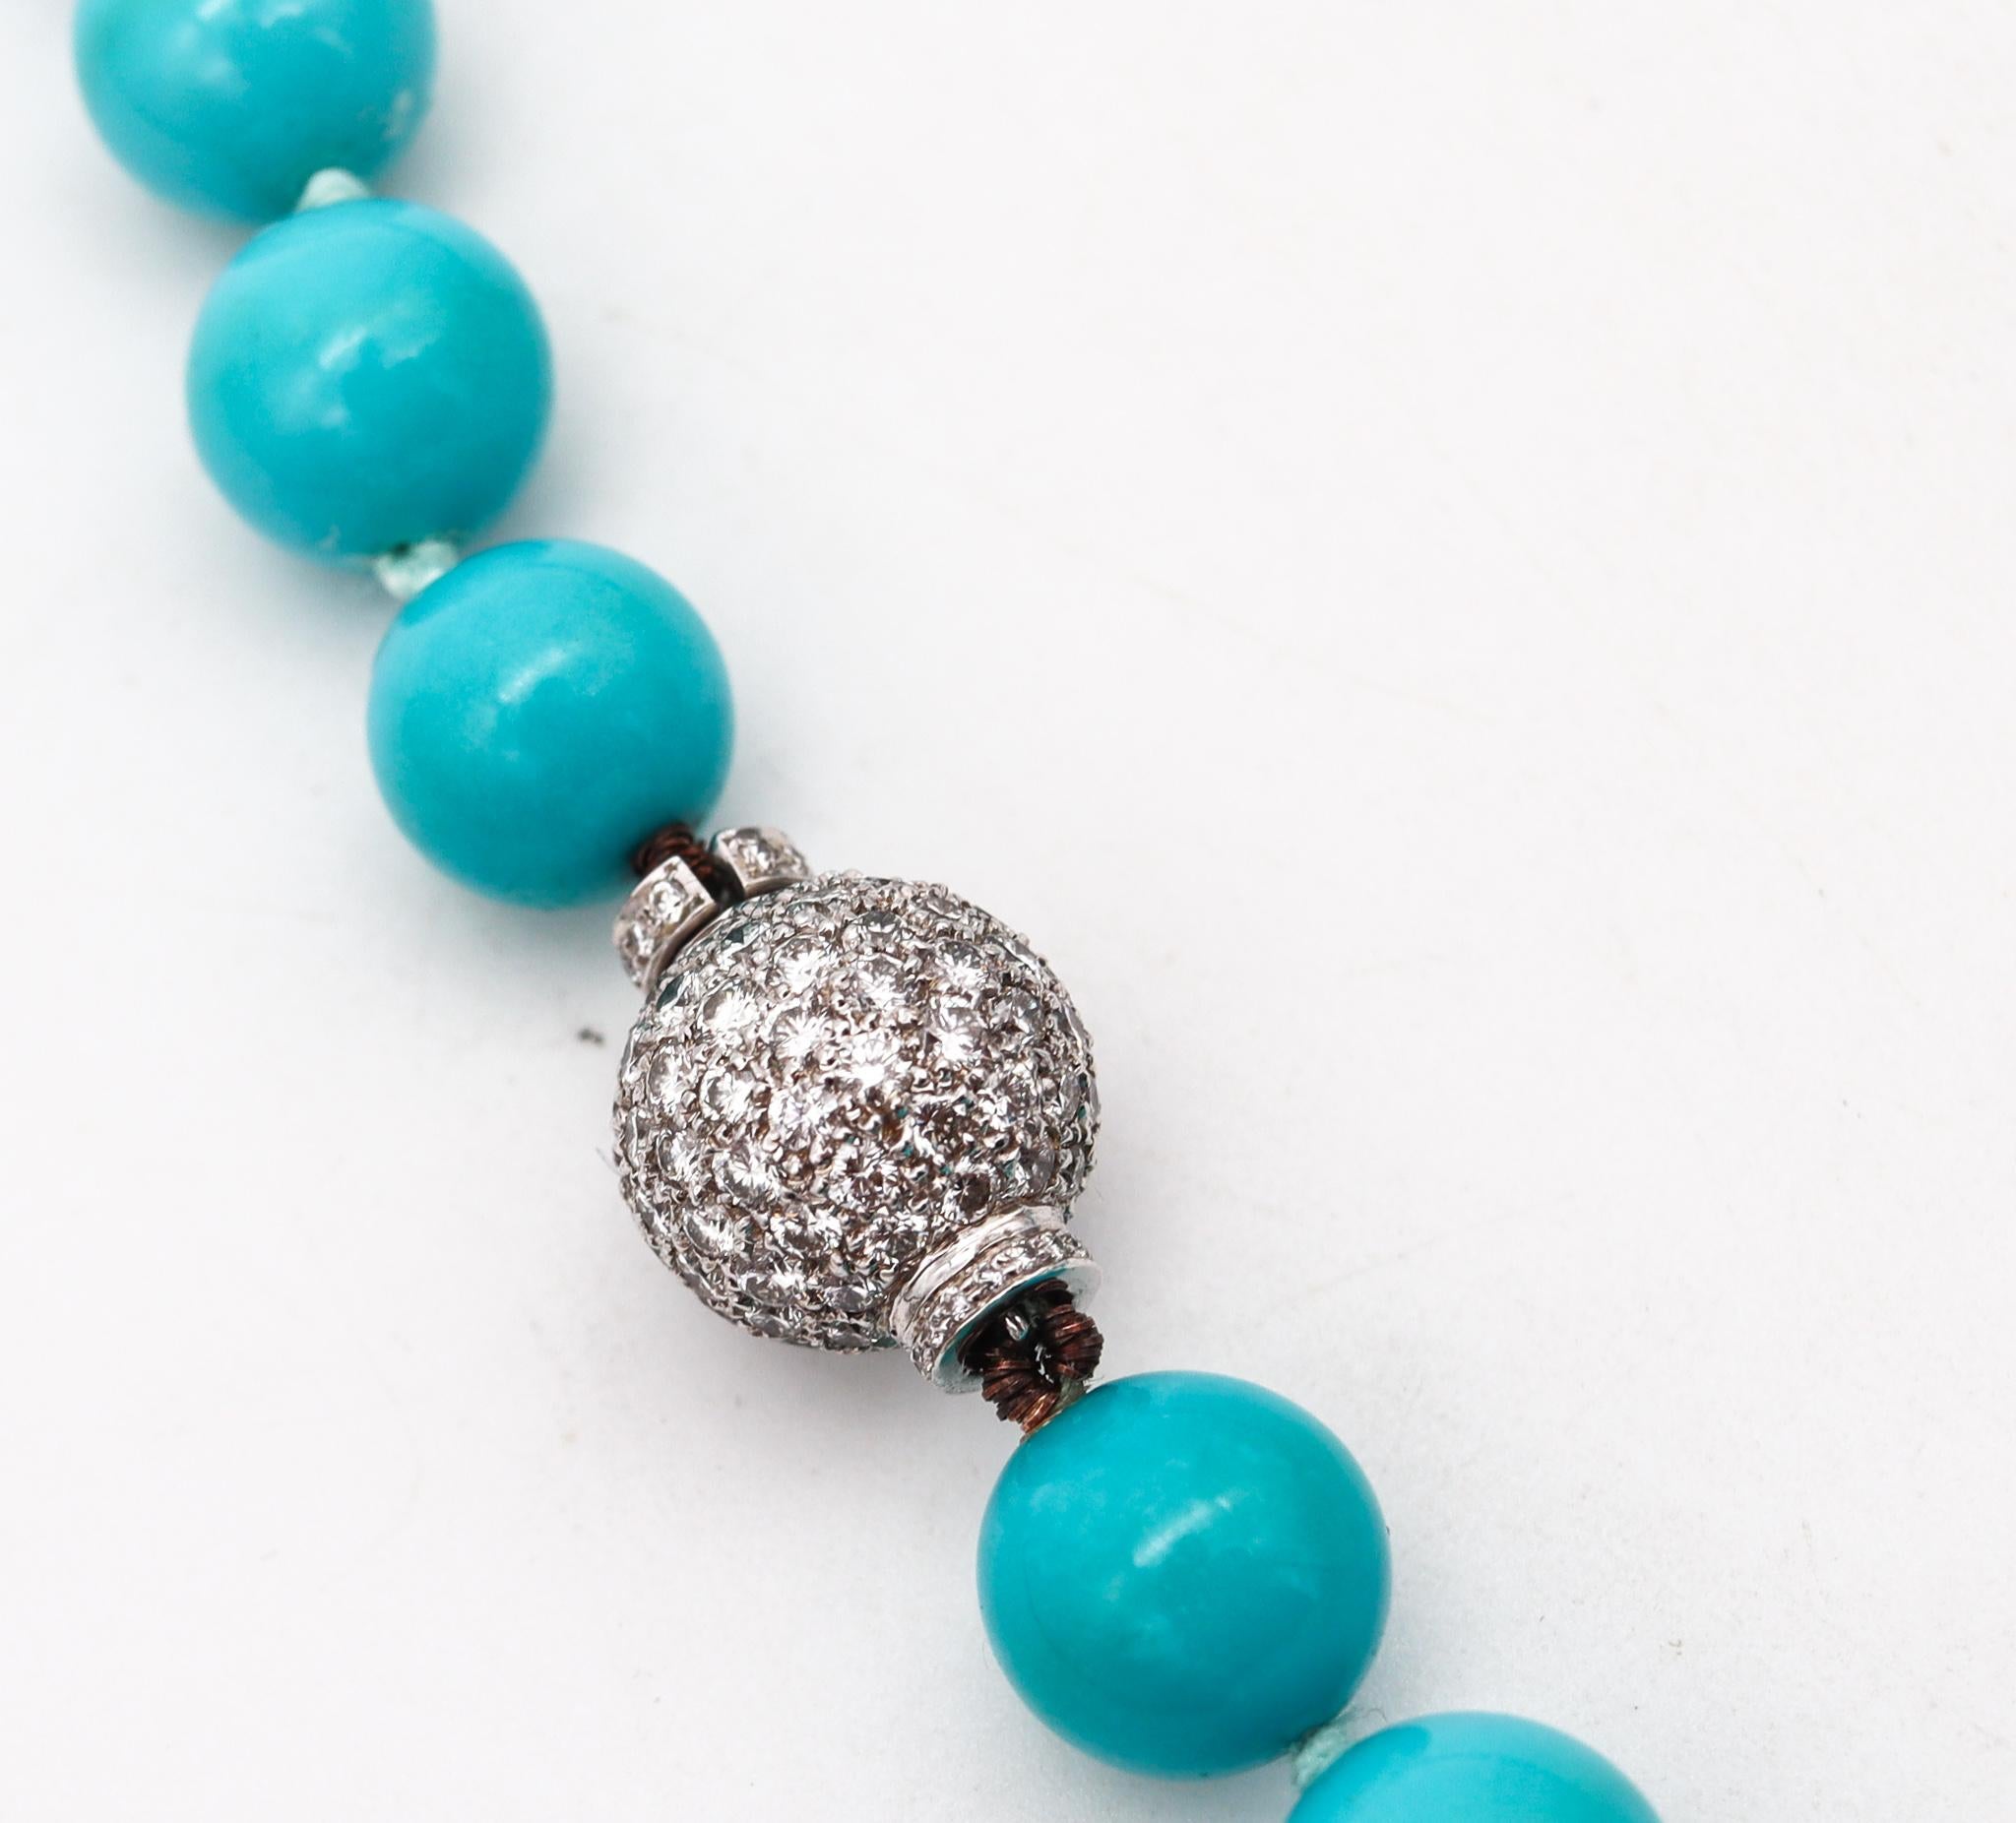 A sleeping beauty blue turquoise necklace.

Beautiful and elegant contemporary necklace composed by 39 calibrated round beads of 10 mm x 10 mm carved from natural blue turquoises from the rare Sleeping beauty variety. Fitted with a security sphere